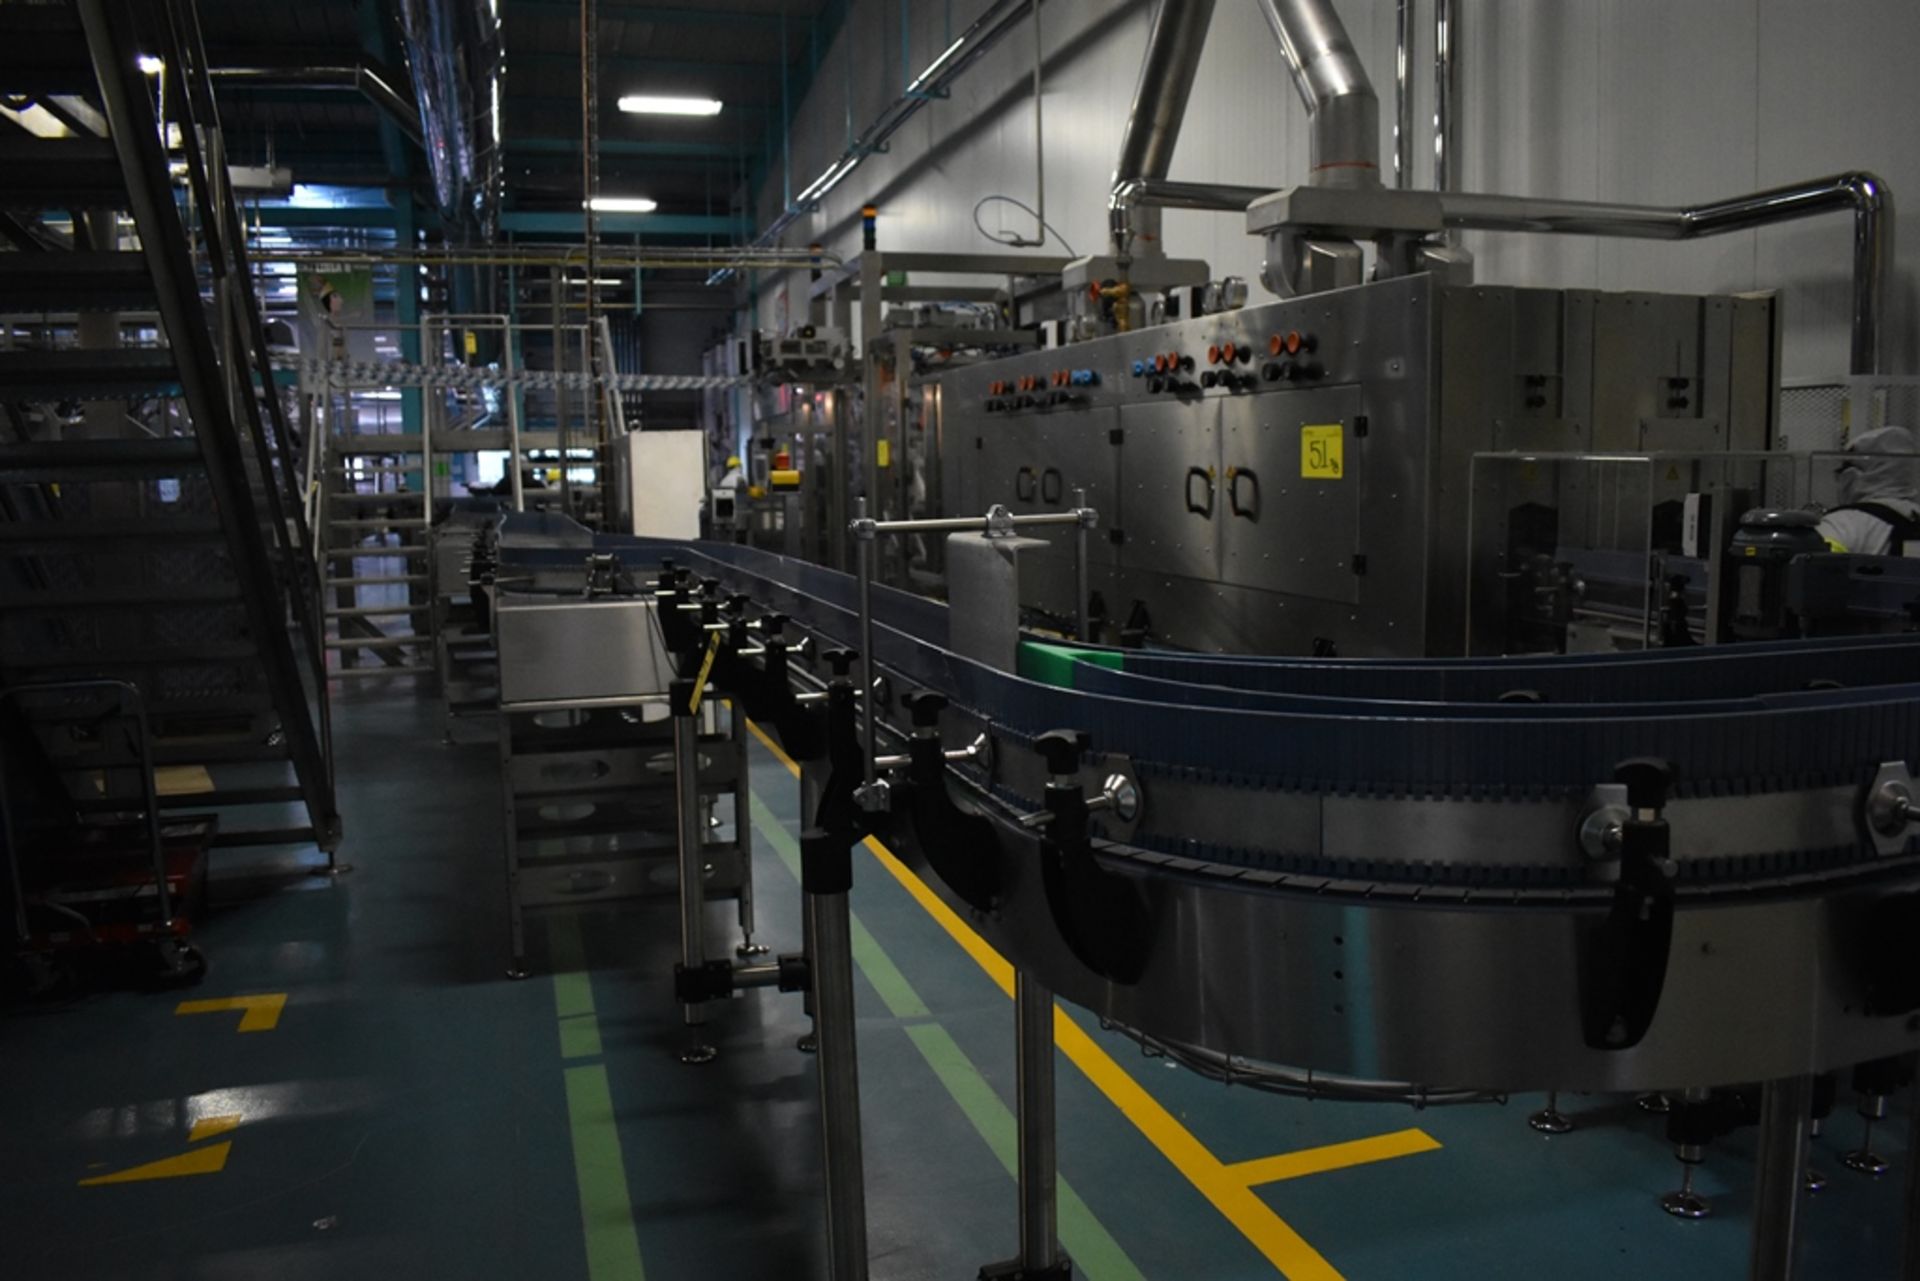 2019 Sleeve Technology Shrink Sleeve Labeling Line, S/N1902079, Consist of Bottle Air Drying Tunnel - Image 27 of 50